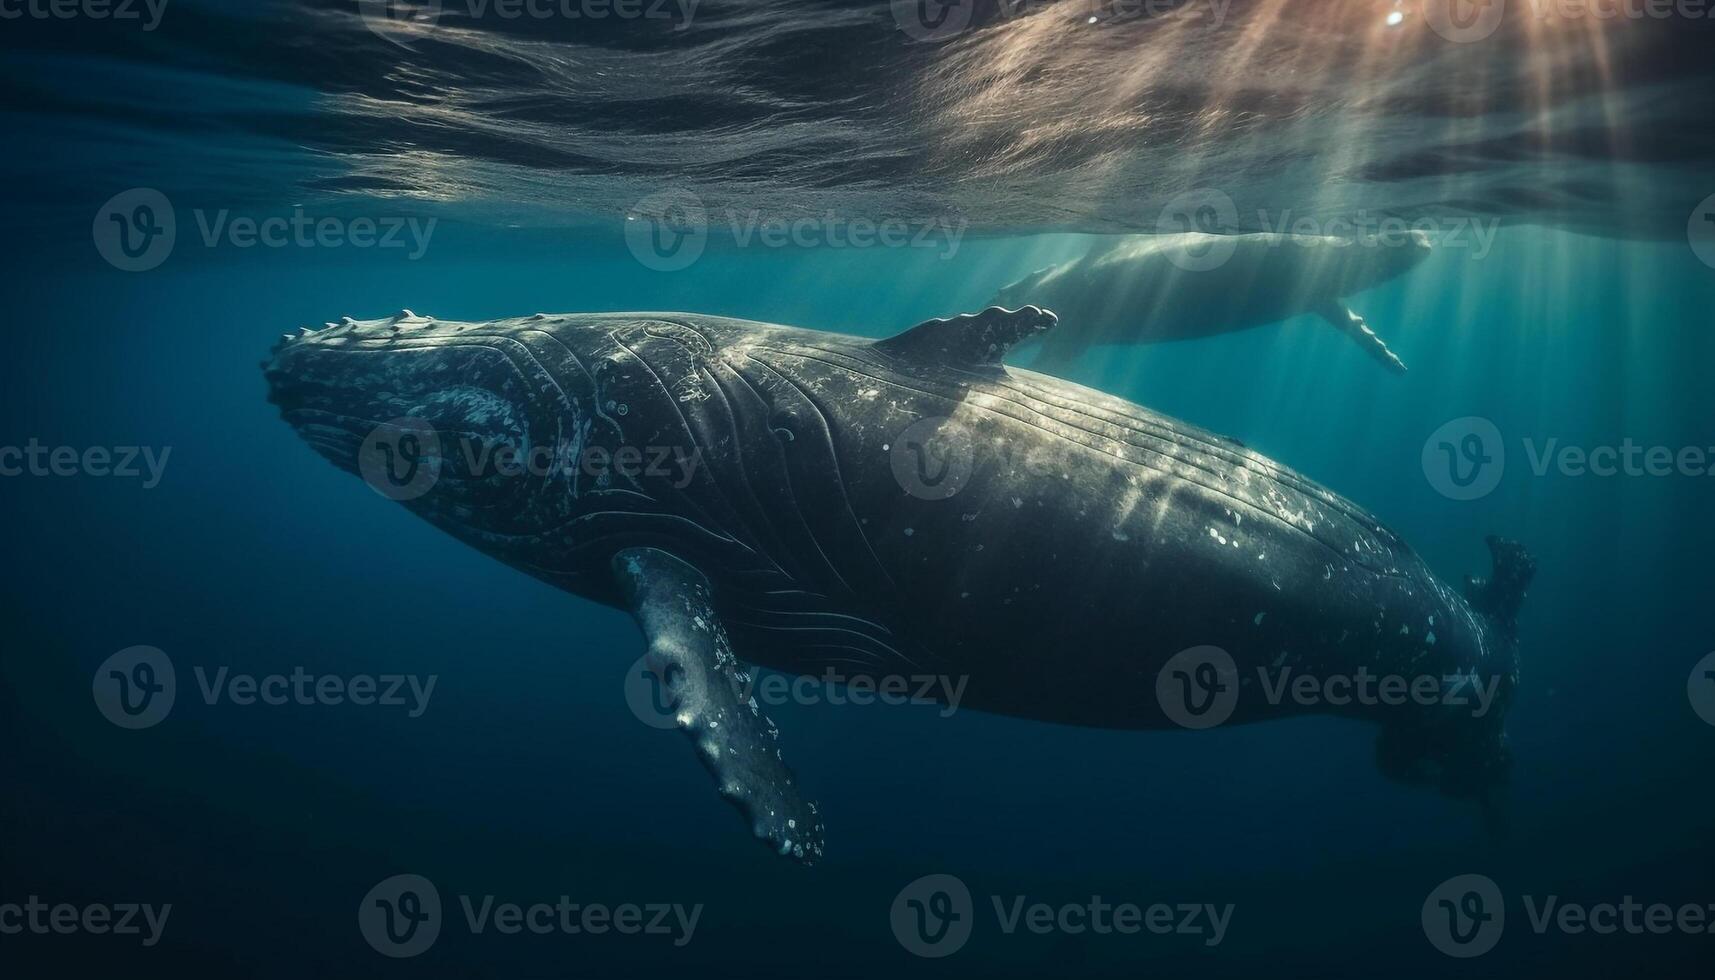 Deep below, giant humpback whale swims majestic in tropical seascape generated by AI photo